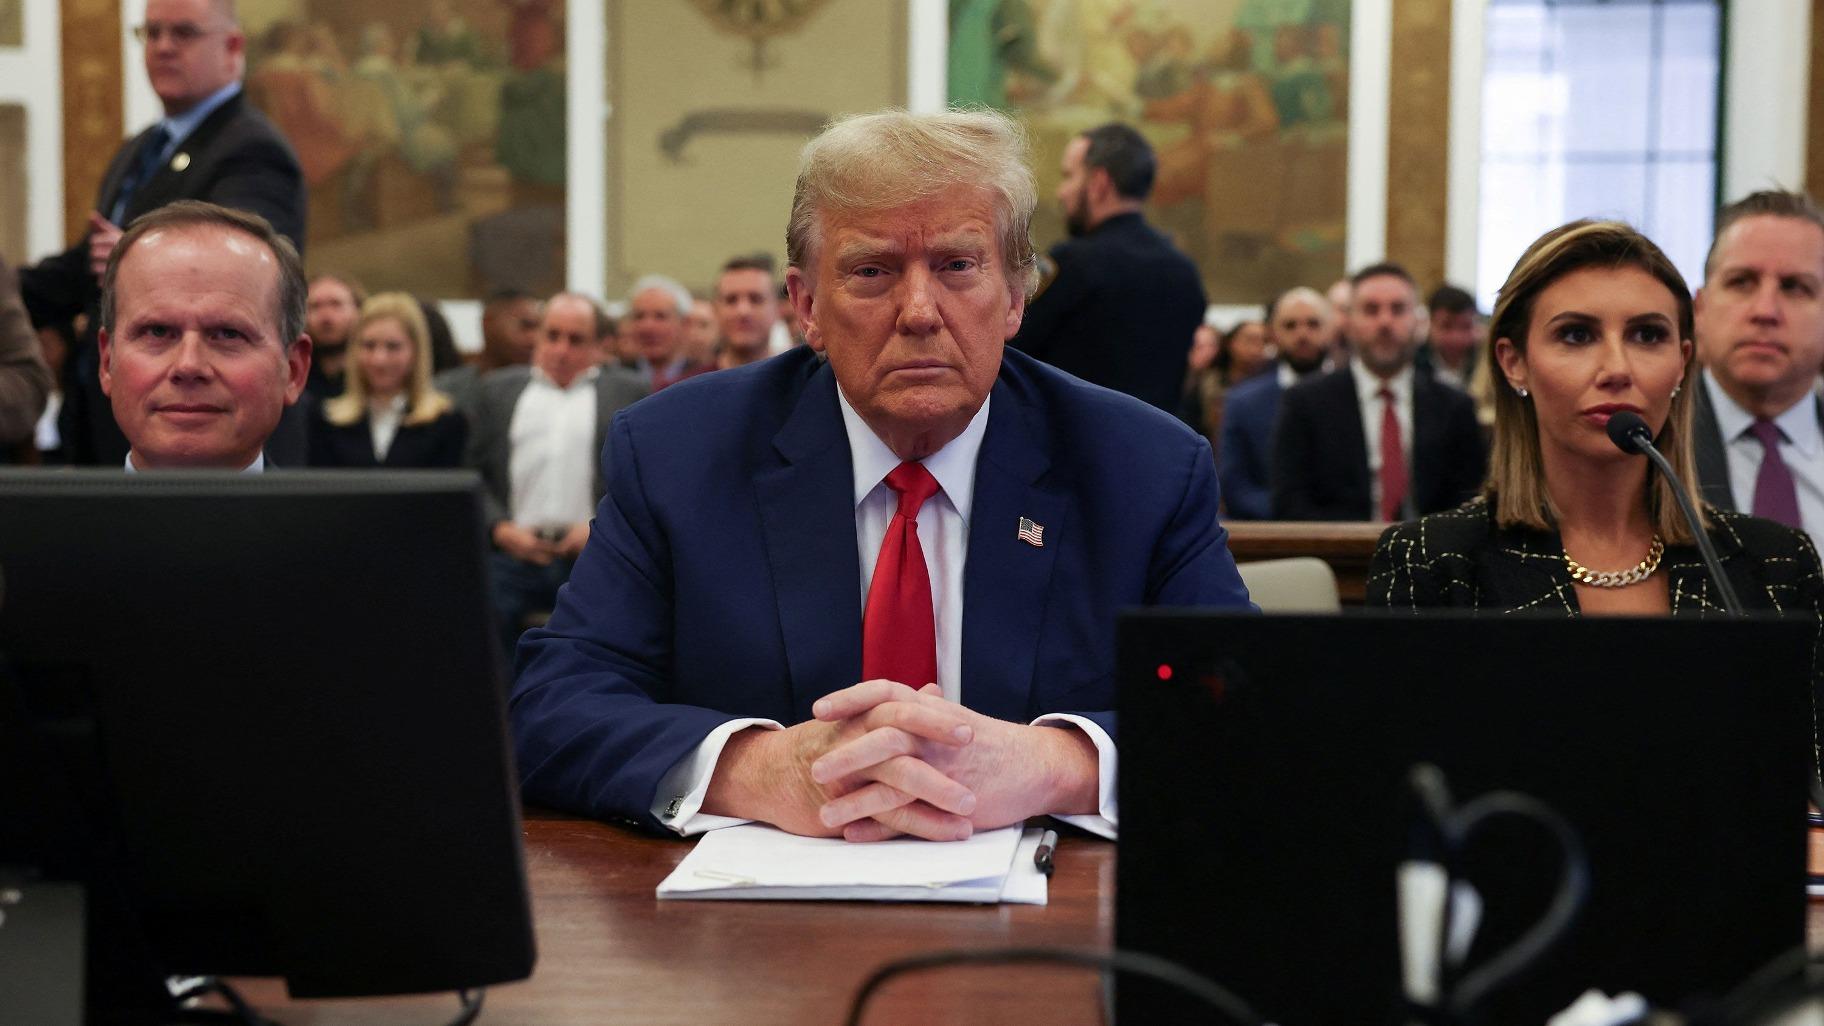 Former President Donald Trump attends the closing arguments in the Trump Organization civil fraud trial at New York State Supreme Court in the Manhattan borough of New York City, Thursday, Jan. 11, 2023. (Shannon Stapleton / Pool via Reuters)